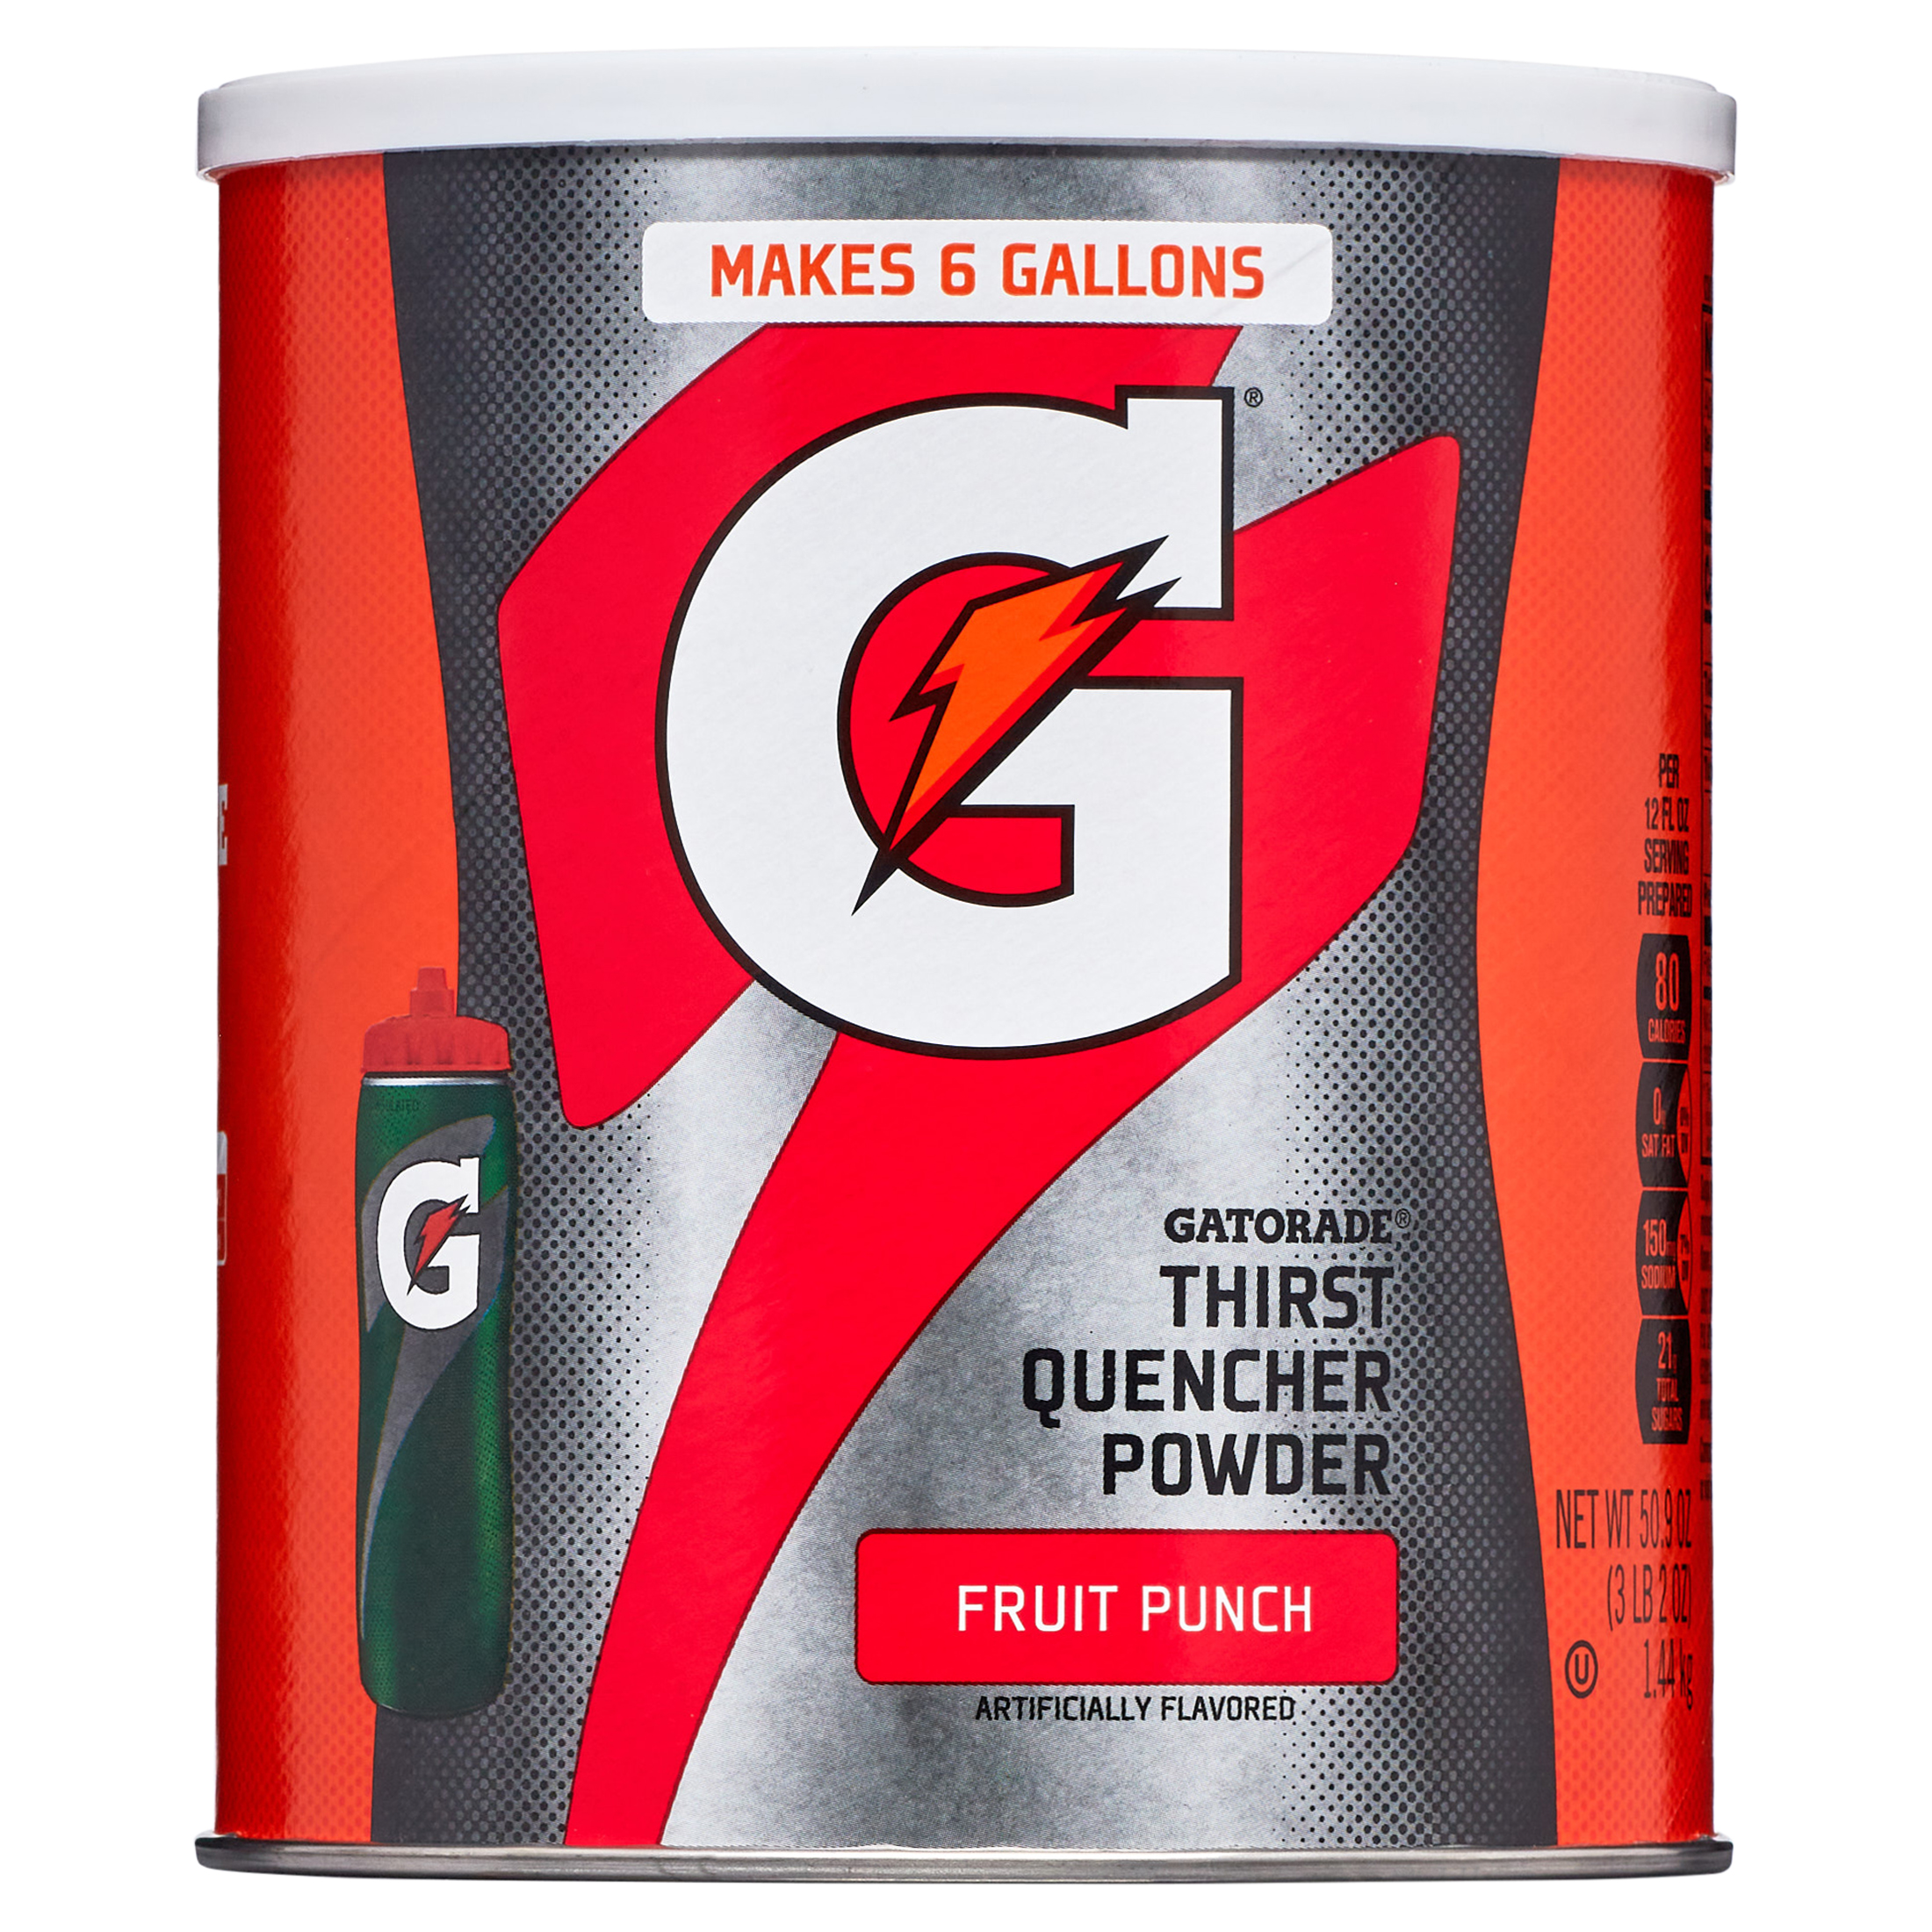 Gatorade Fruit Punch Thirst Quencher Sports Drink Mix Powder, 51 oz Canister - image 1 of 12